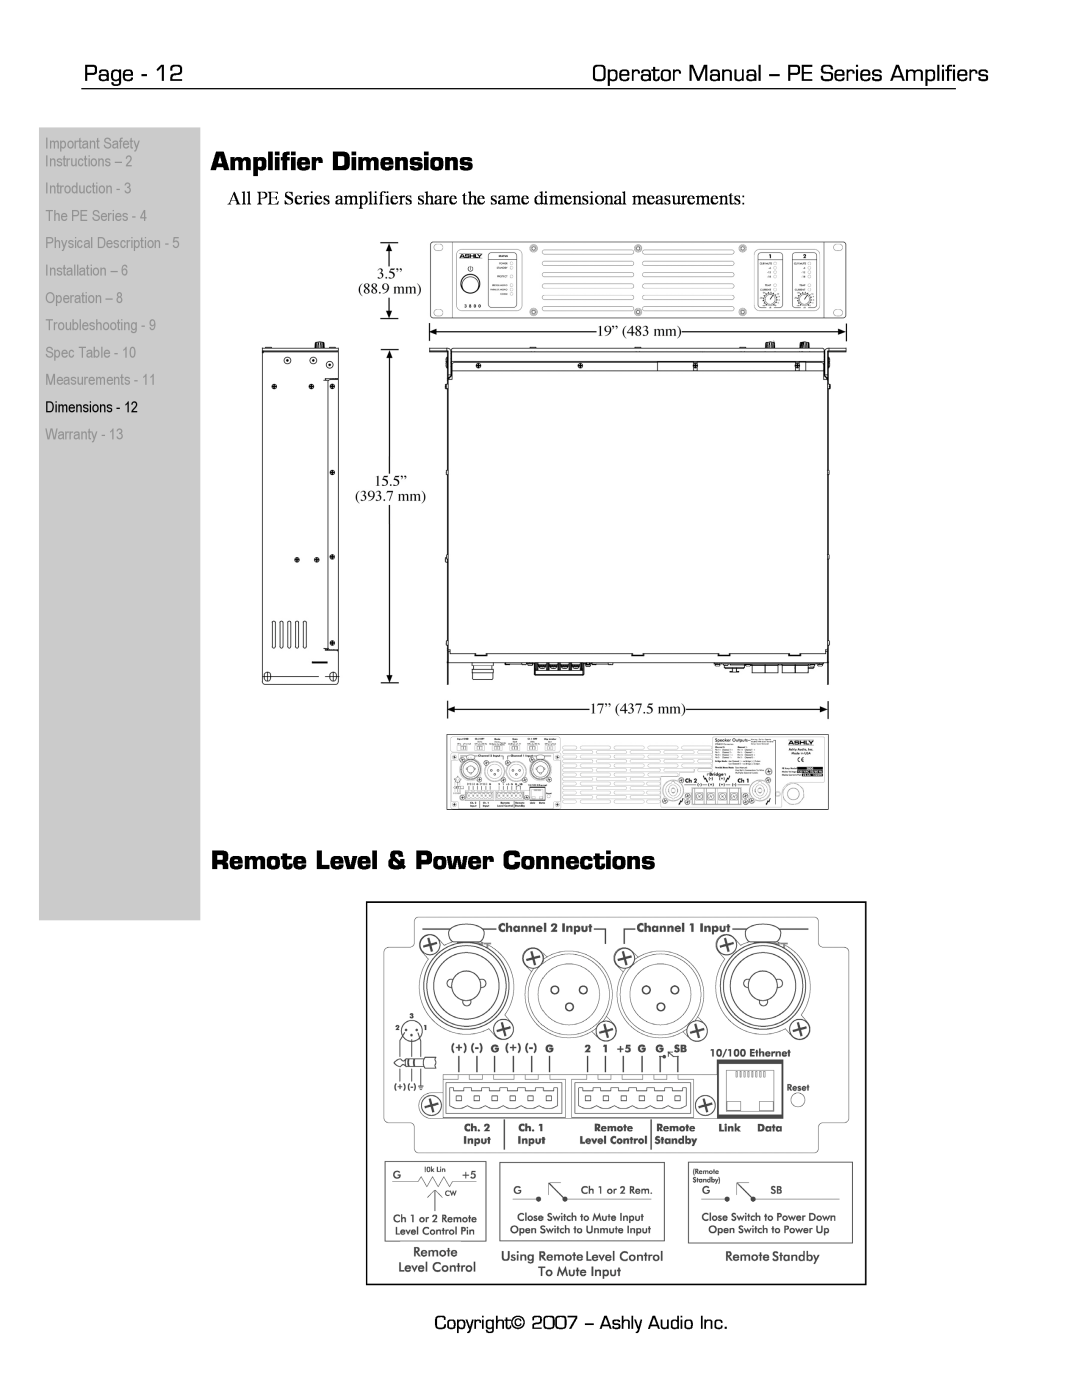 Ashly Amplifier Dimensions, Remote Level & Power Connections, Page, Operator Manual - PE Series Amplifiers, Warranty 